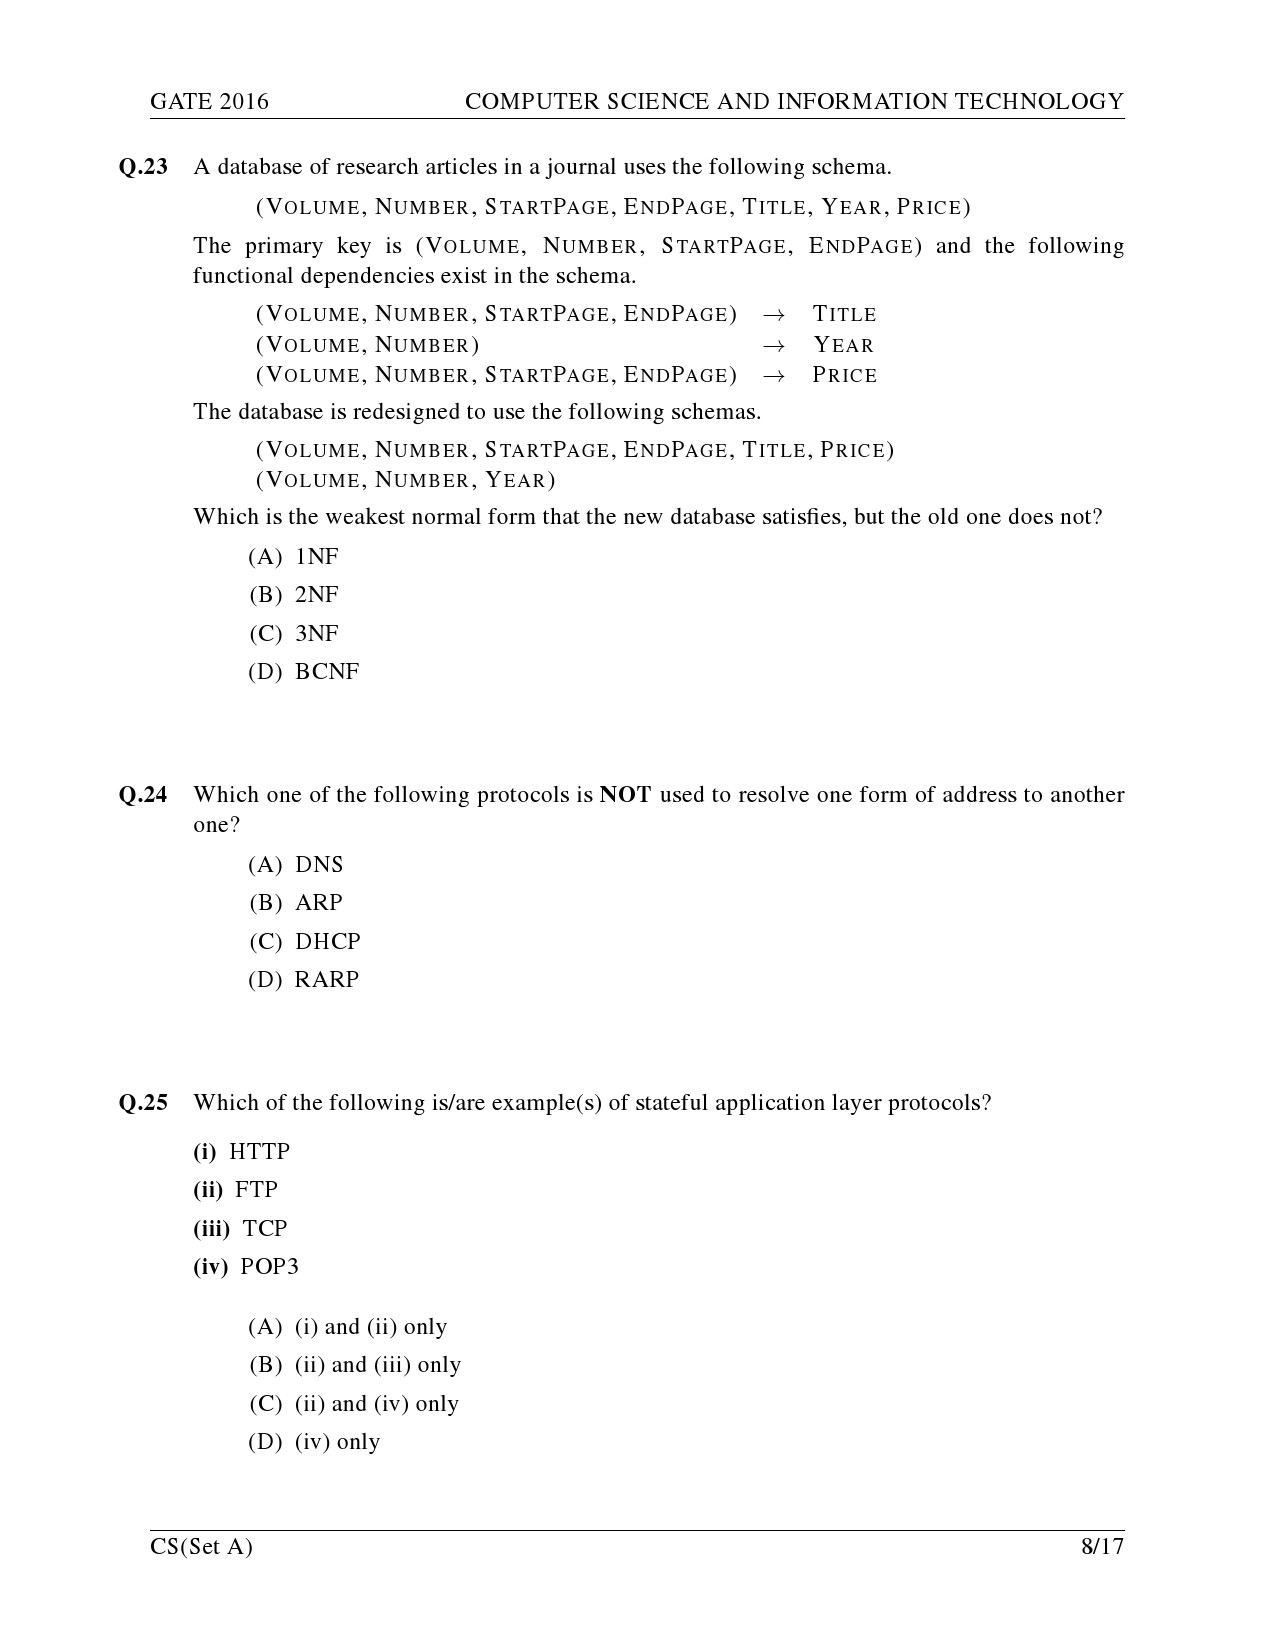 GATE Exam Question Paper 2016 Computer Science and Information Technology Set A 11